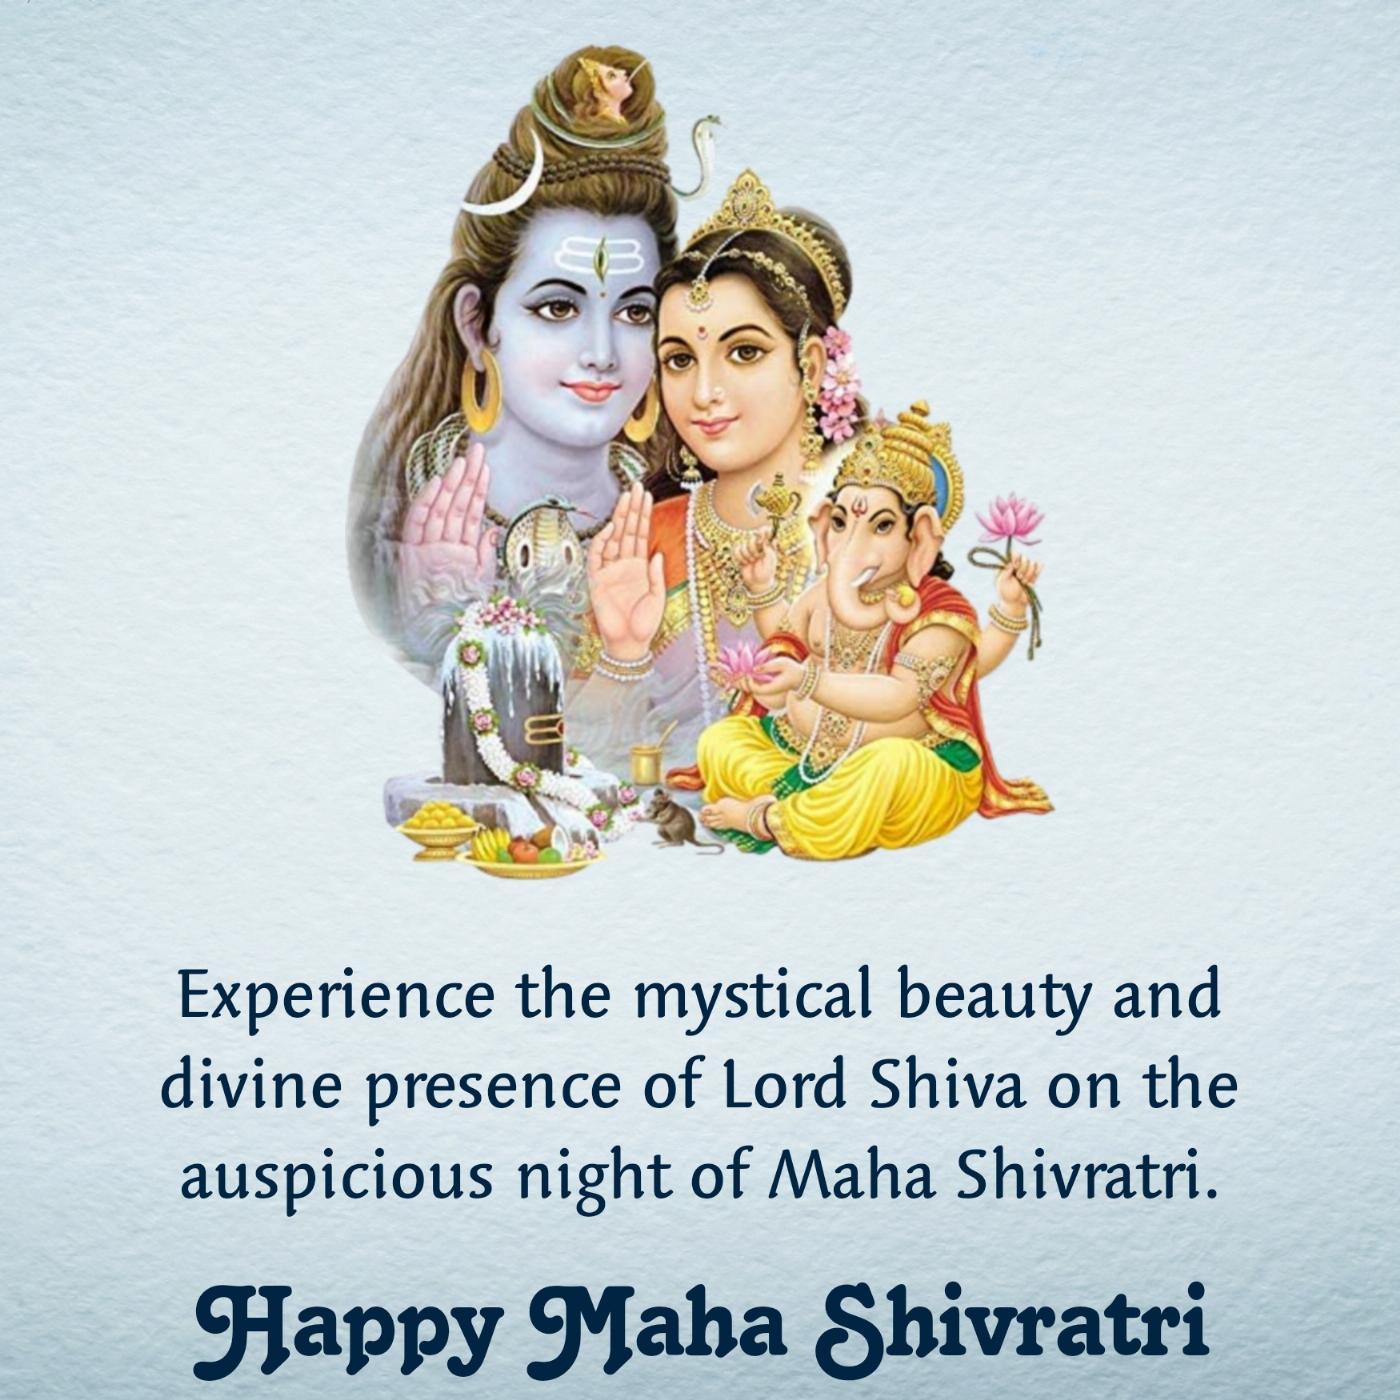 Experience the mystical beauty and divine presence of Lord Shiva